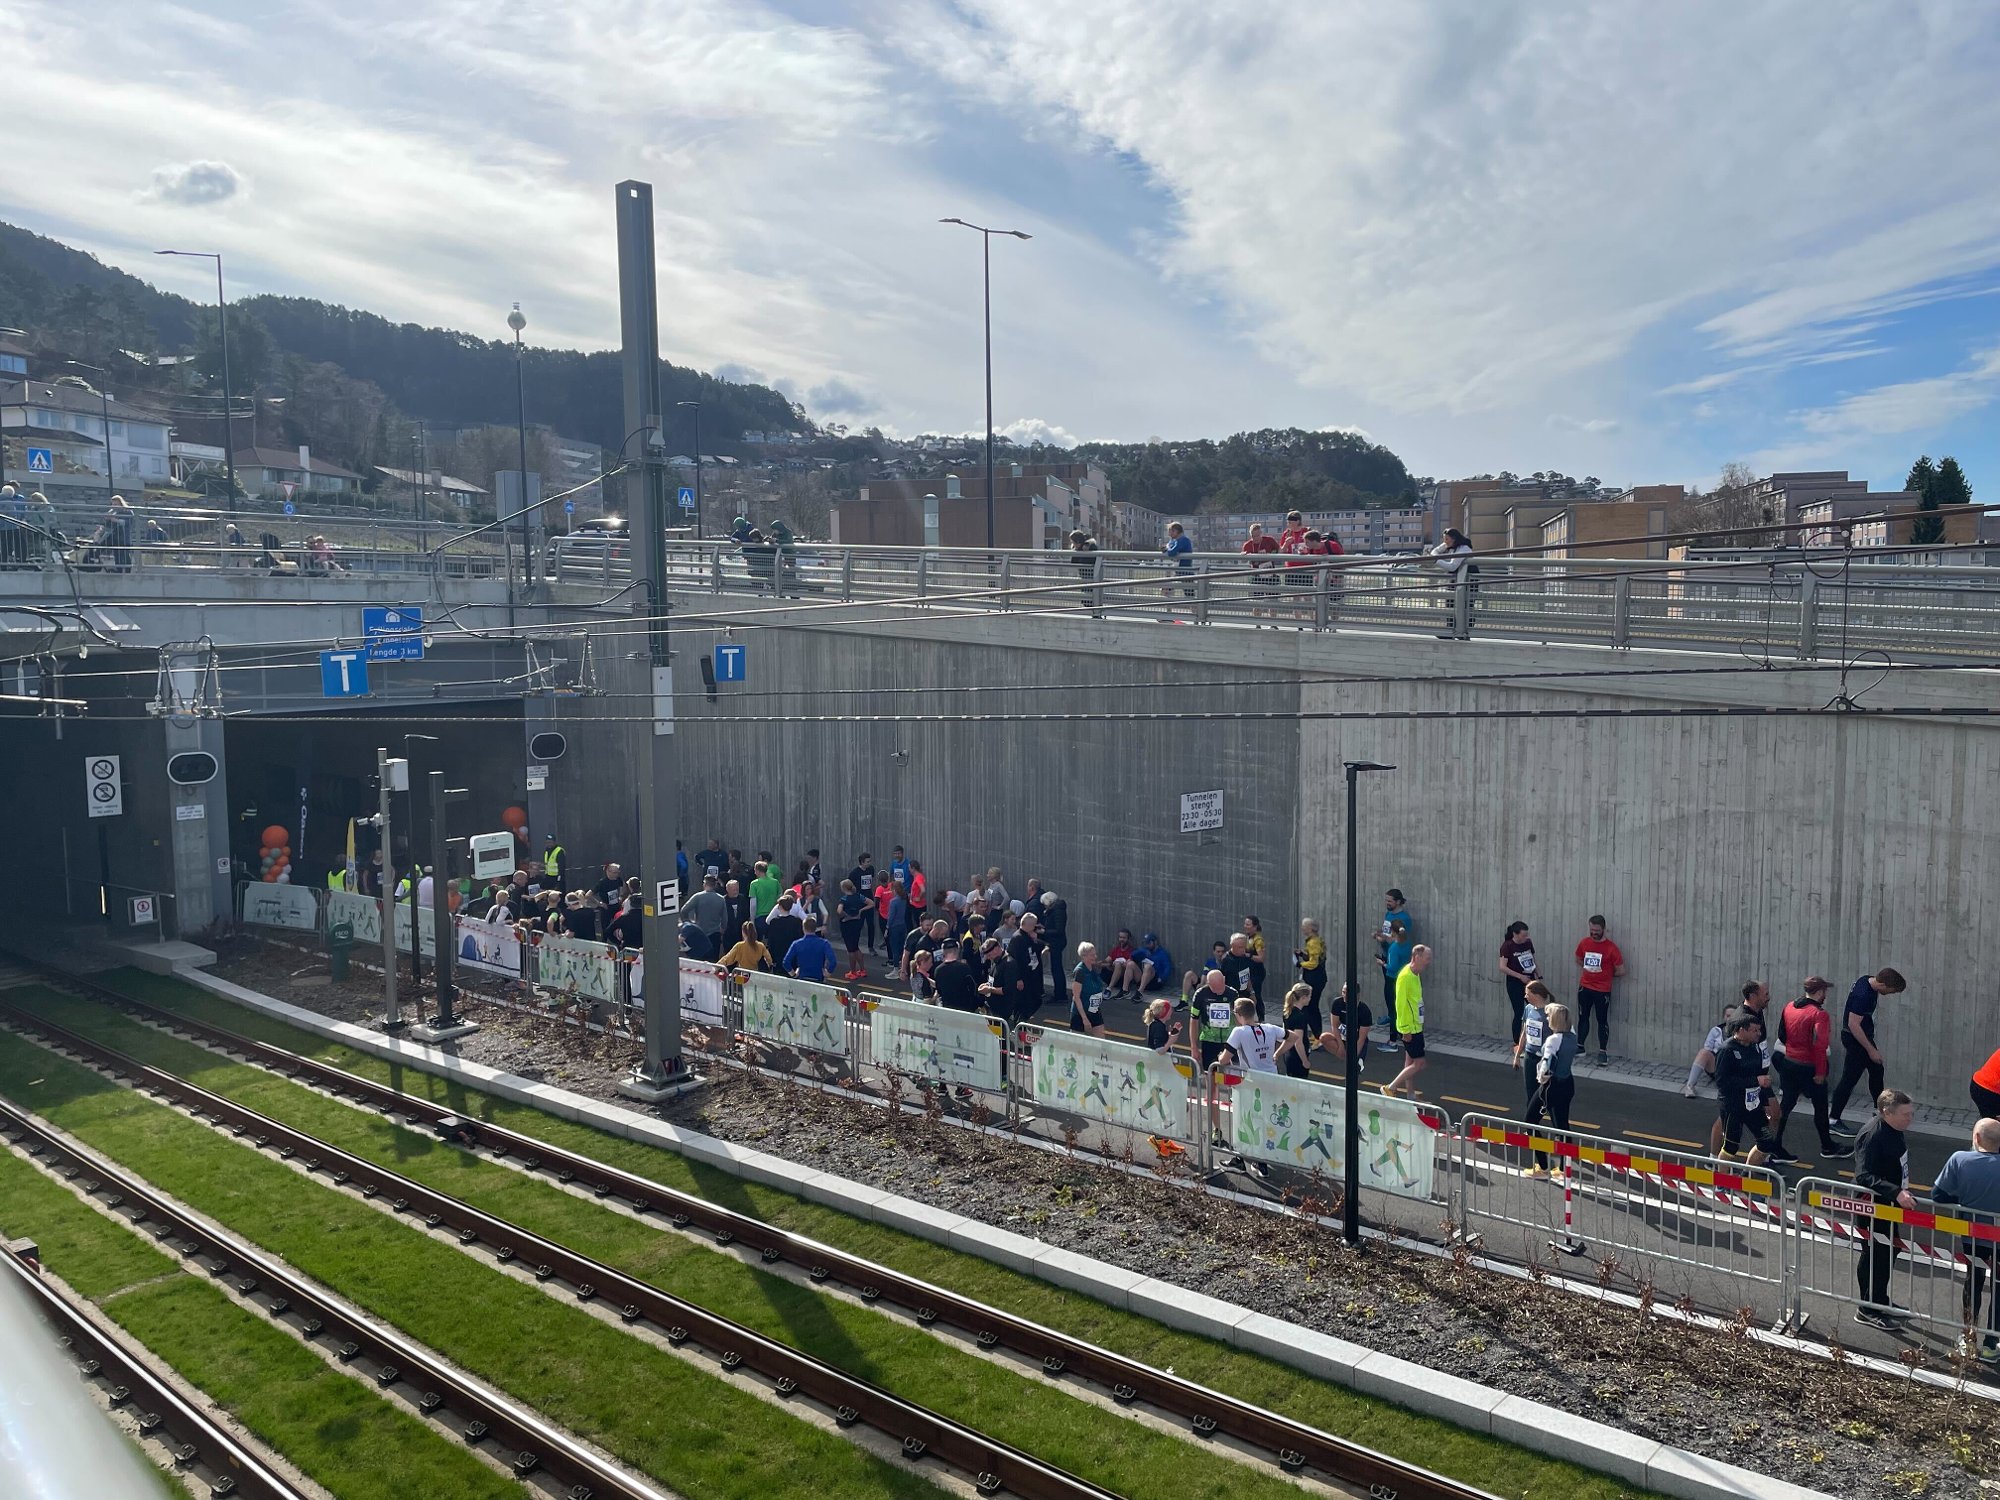 Bergen welcomed 10,000 active residents on the opening weekend of the tunnel